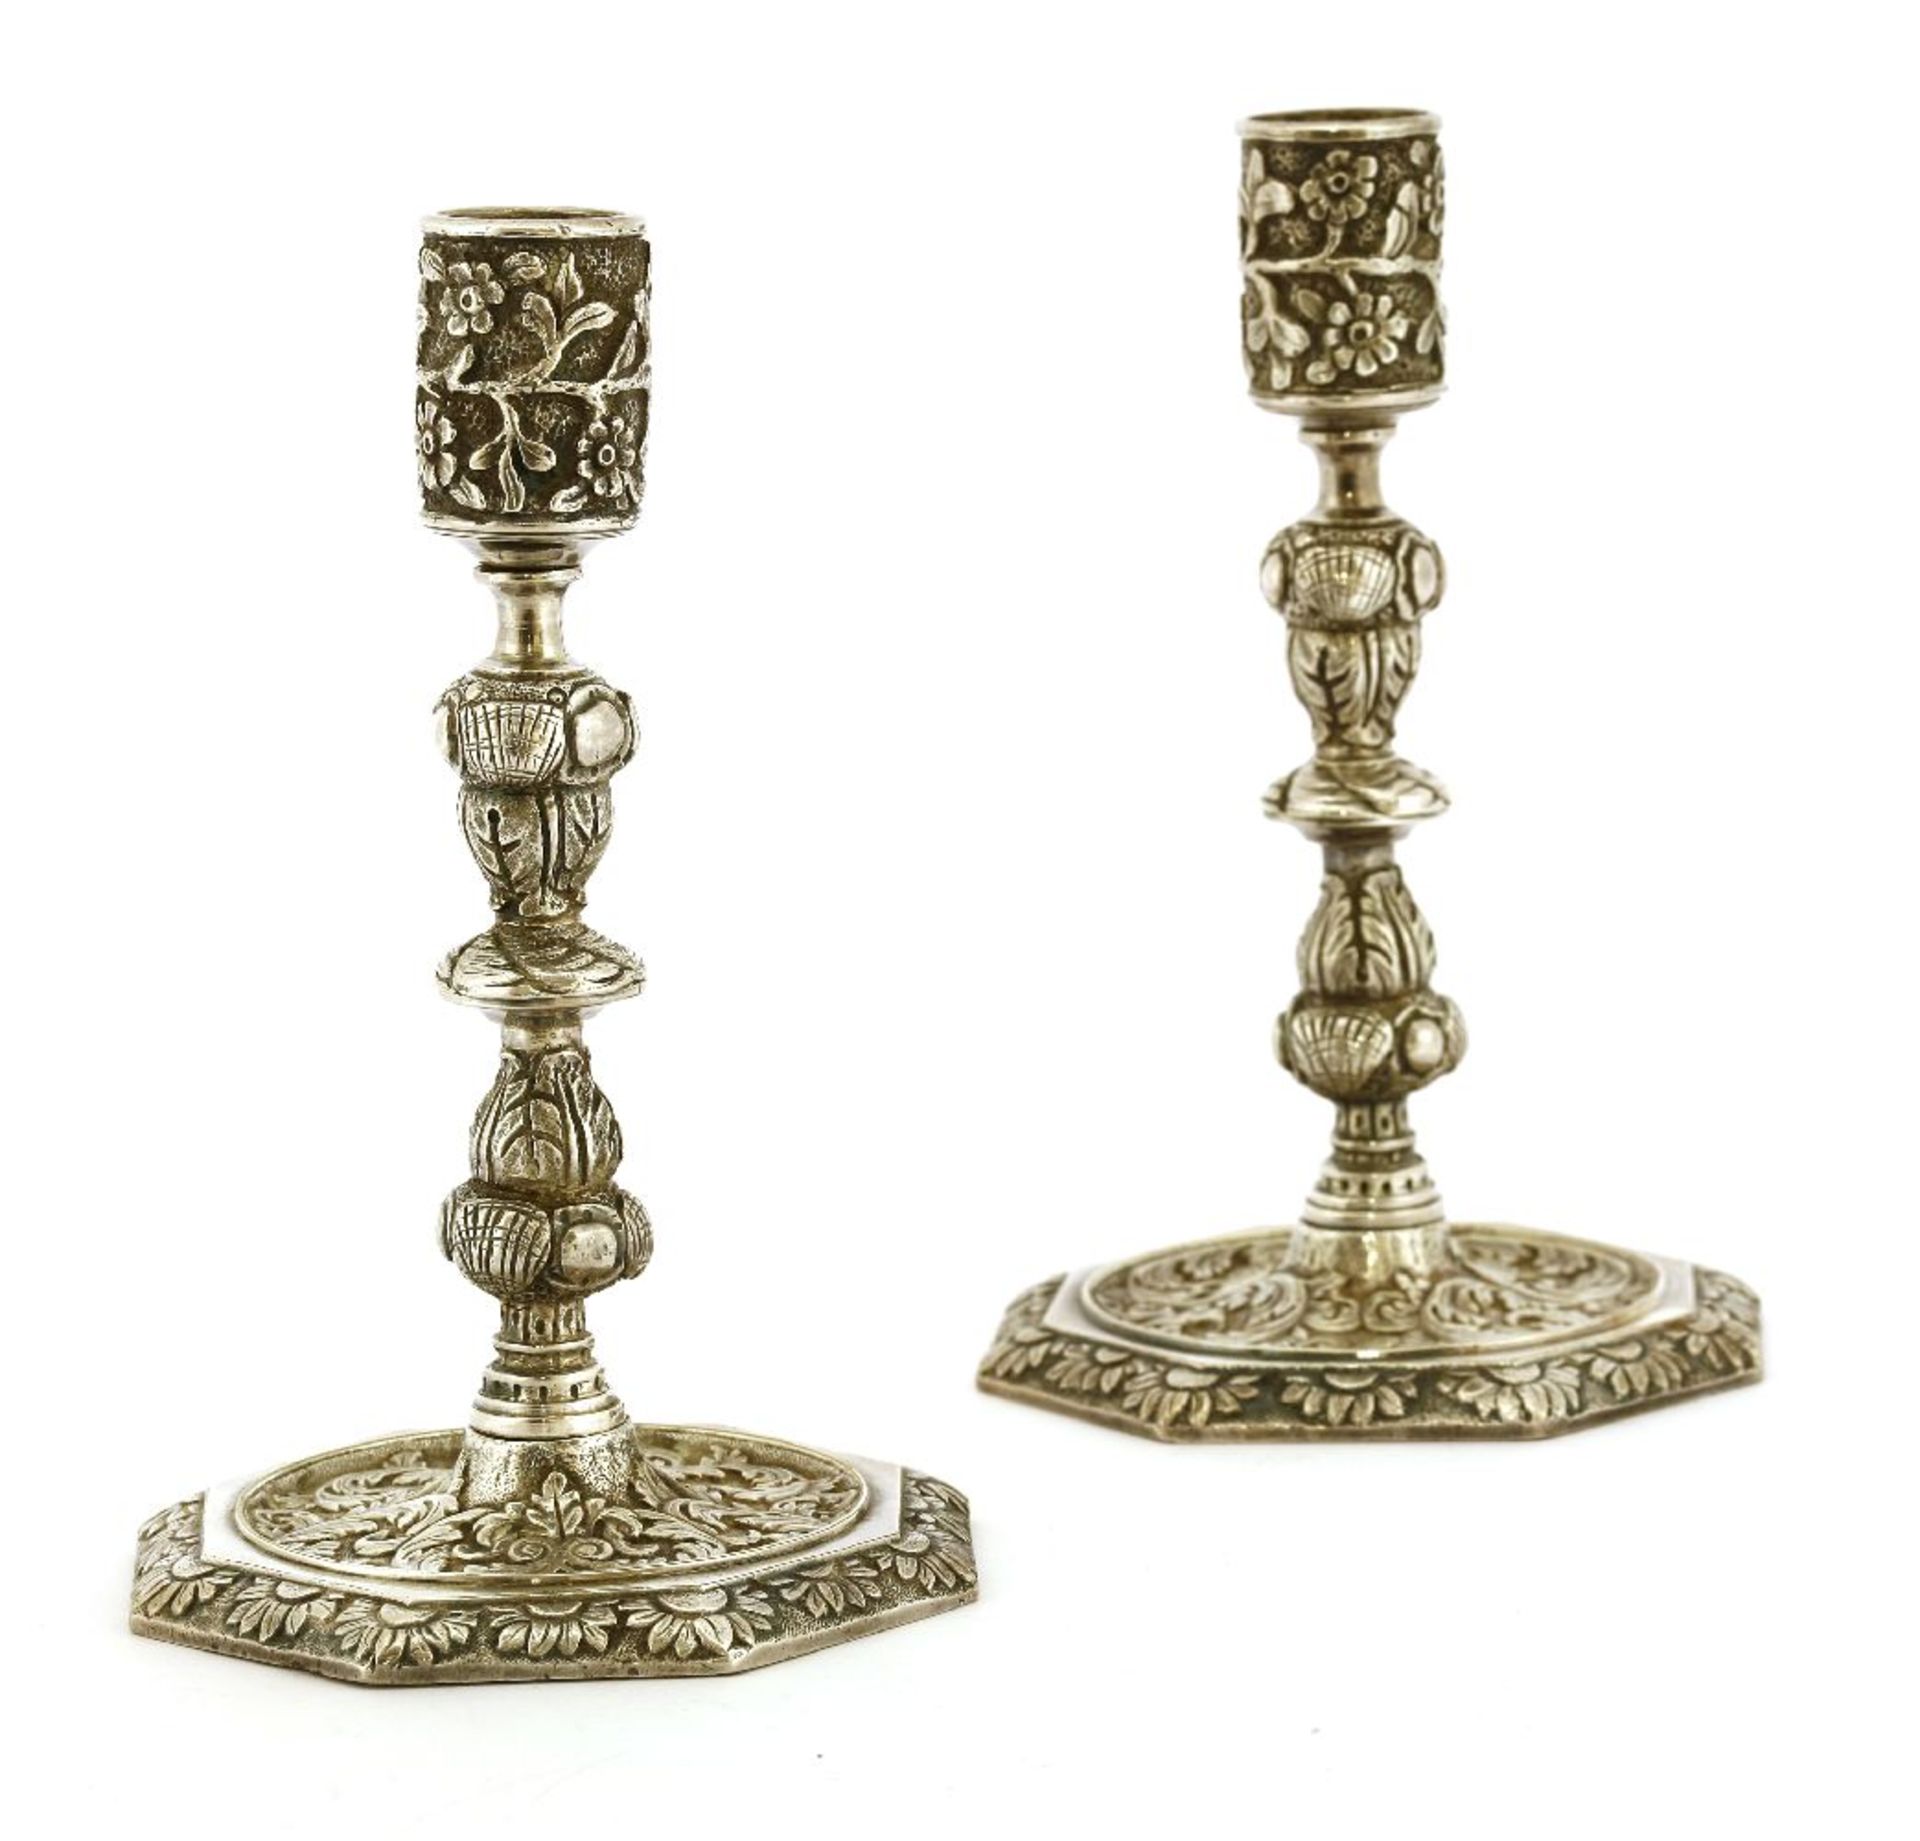 A pair of 17th century-style cast nickel candlesticks,each with a floral cast stem on an octagonal